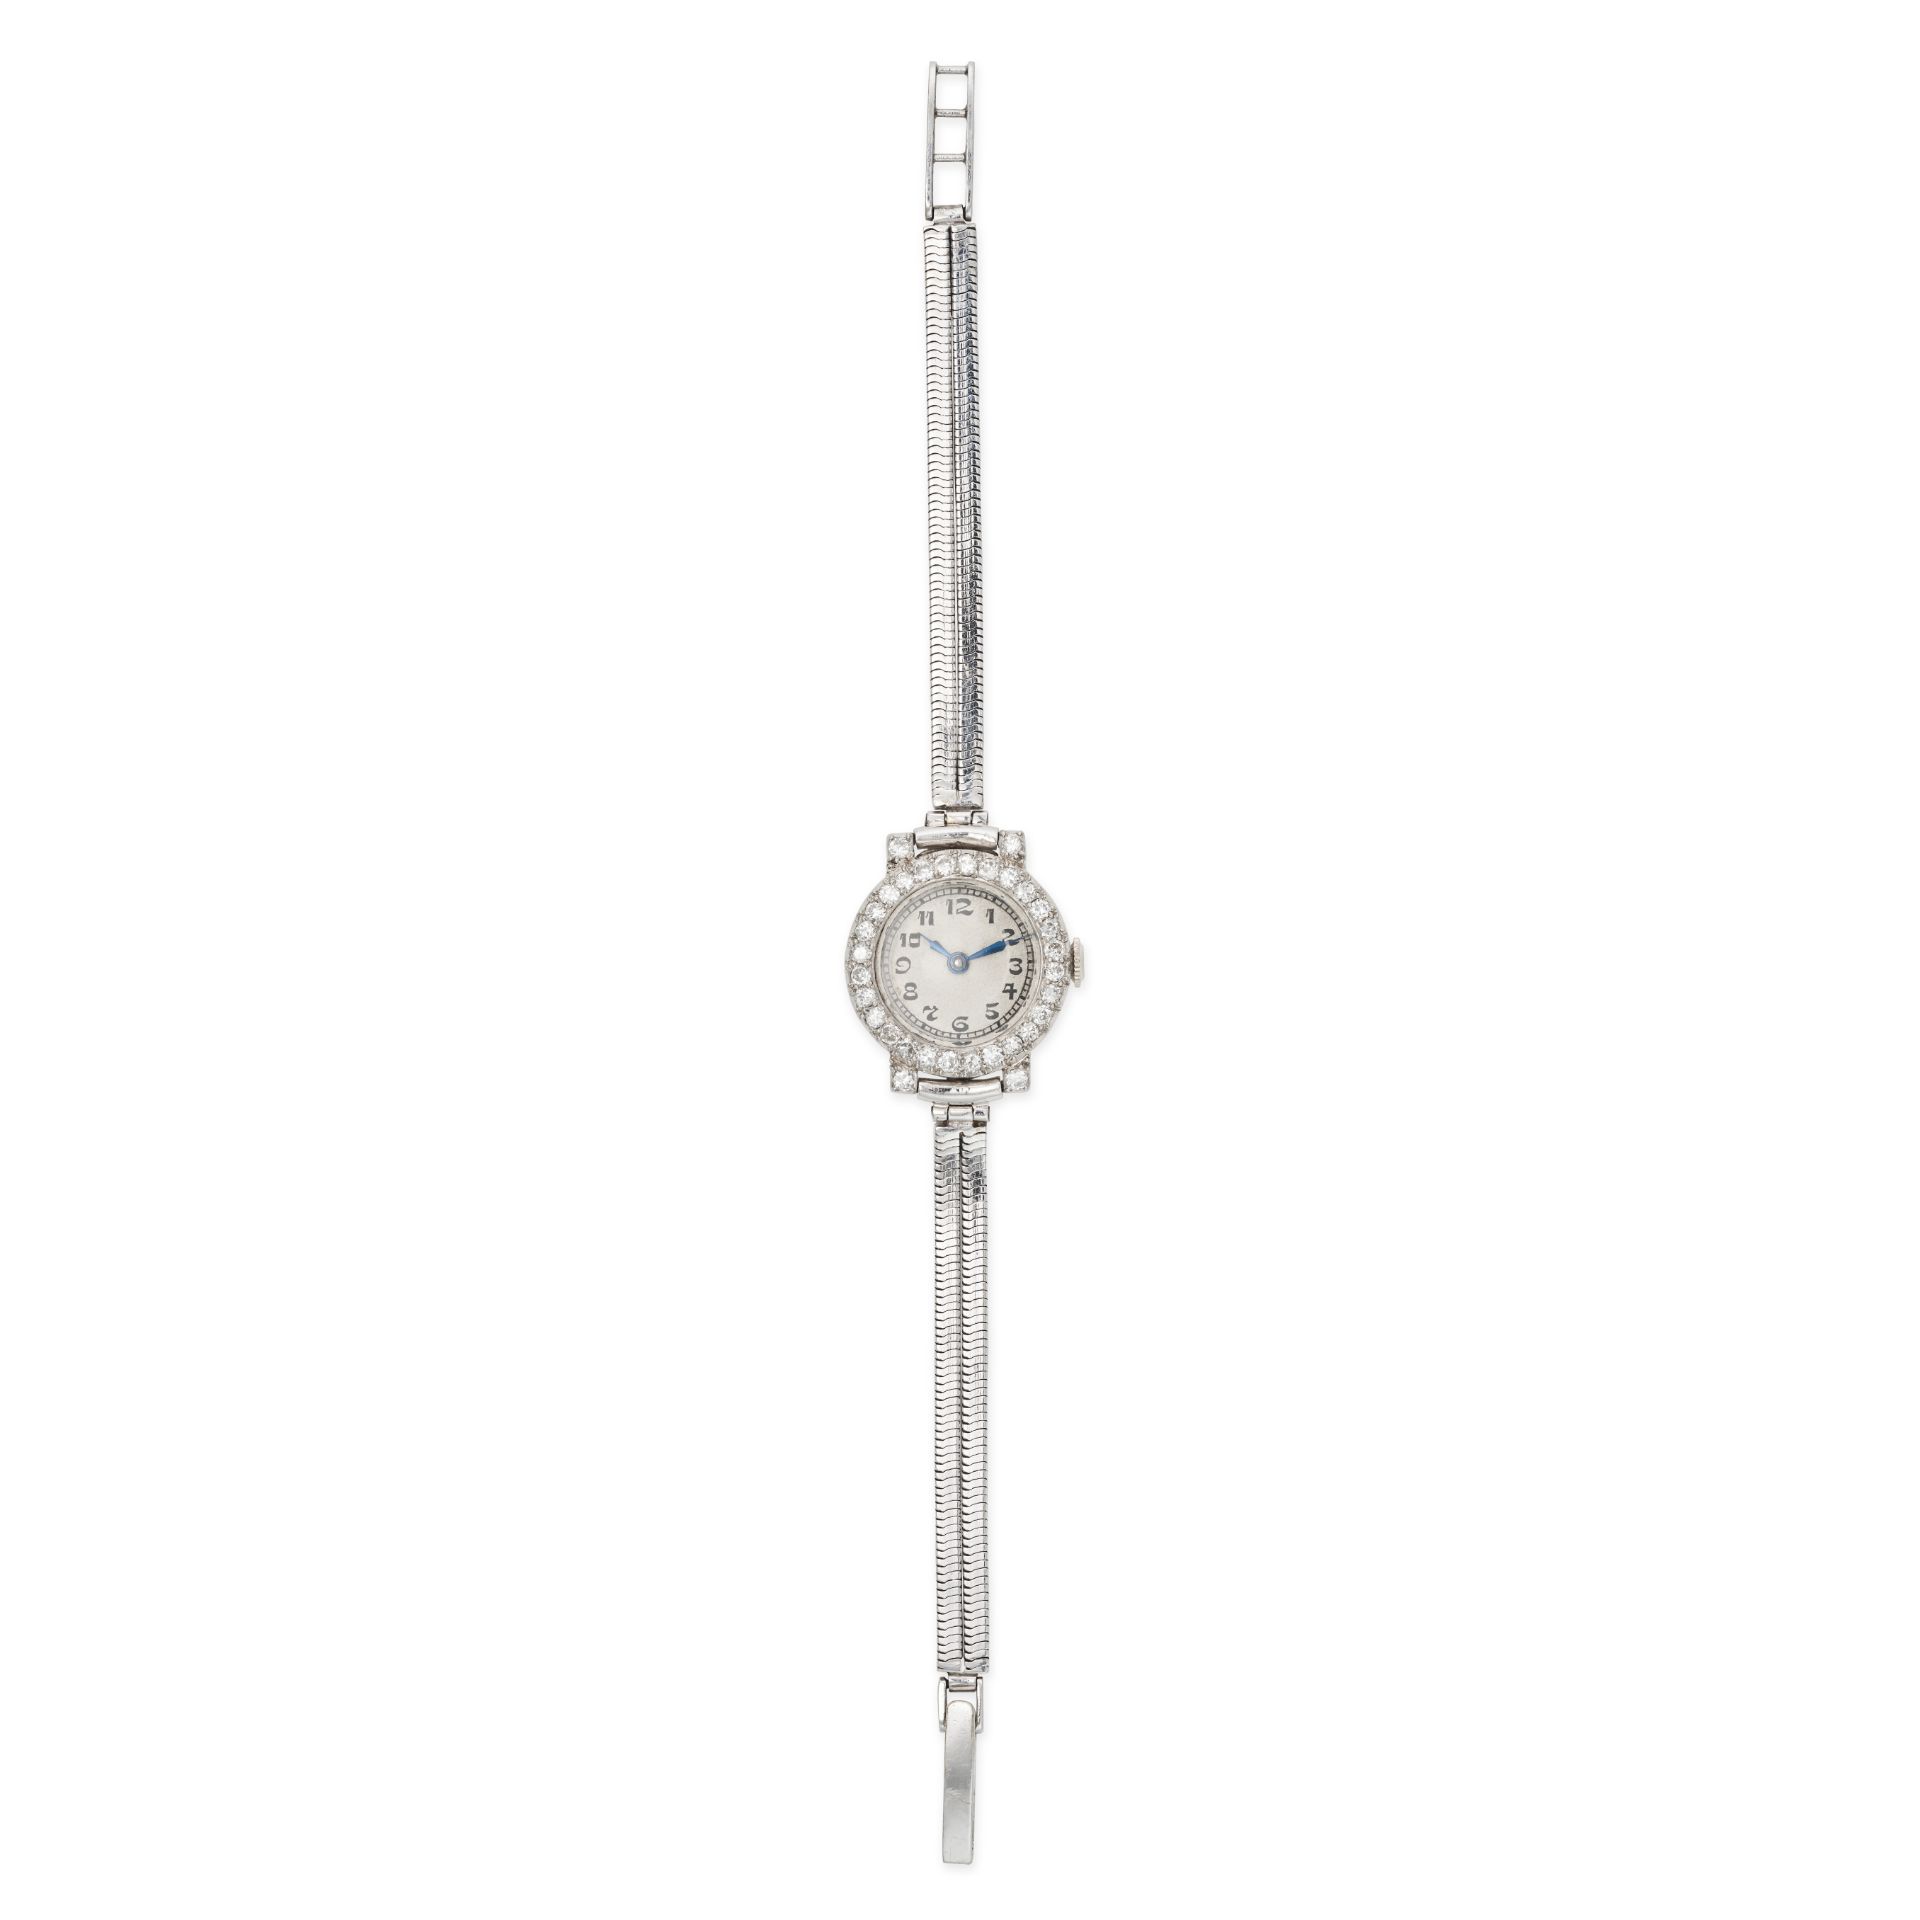 A LADIES DIAMOND WRISTWATCH in 9ct white gold, the circular face with a white dial and Arabic num...